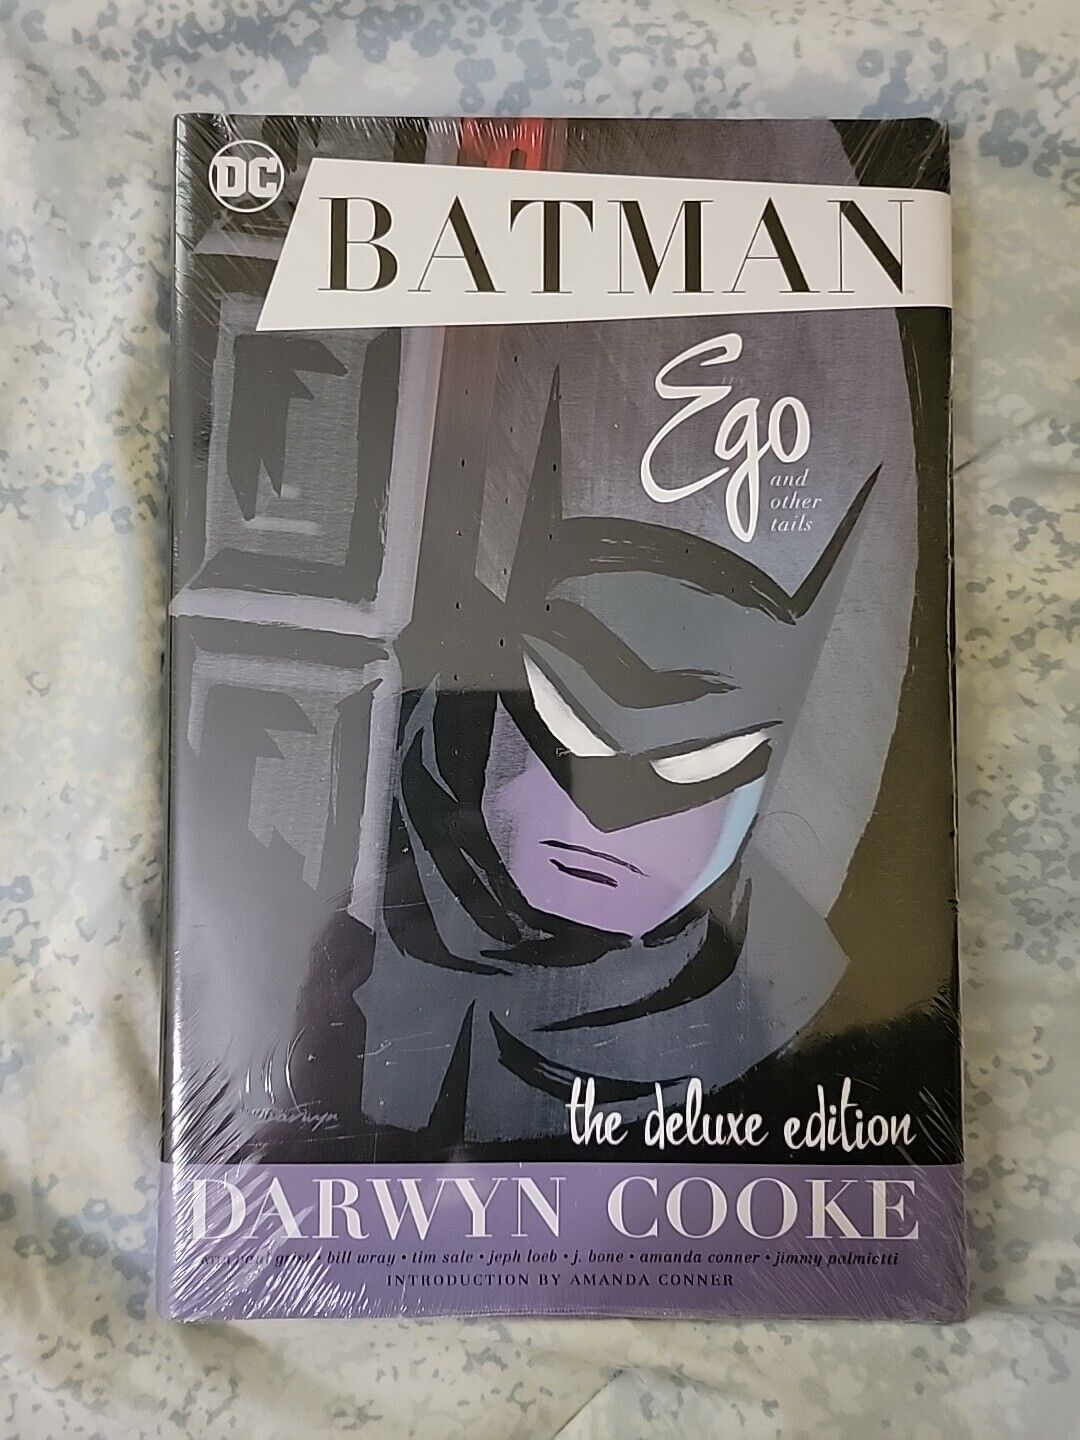 Batman: Ego and Other Tails Deluxe Edition by Darwyn Cooke: Used